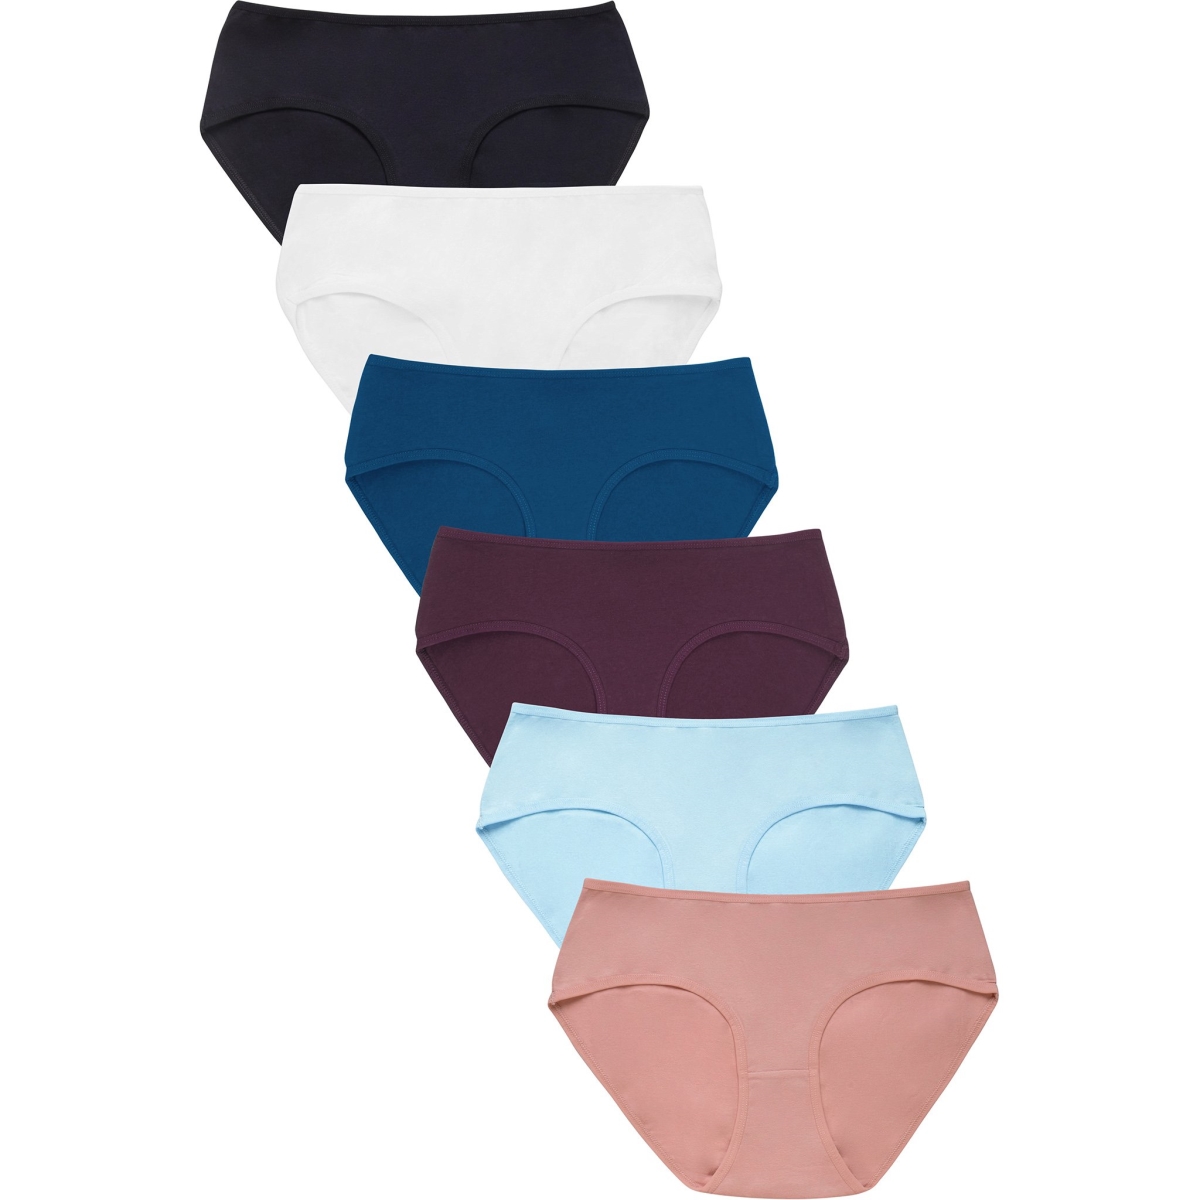 Picture of 247 Frenzy 247-LP1379CKE9-SM Womens Essentials Cotton Stretch Bikini Panty Underwear with Extended Side Seams - Assorted Color - Small - Pack of 6